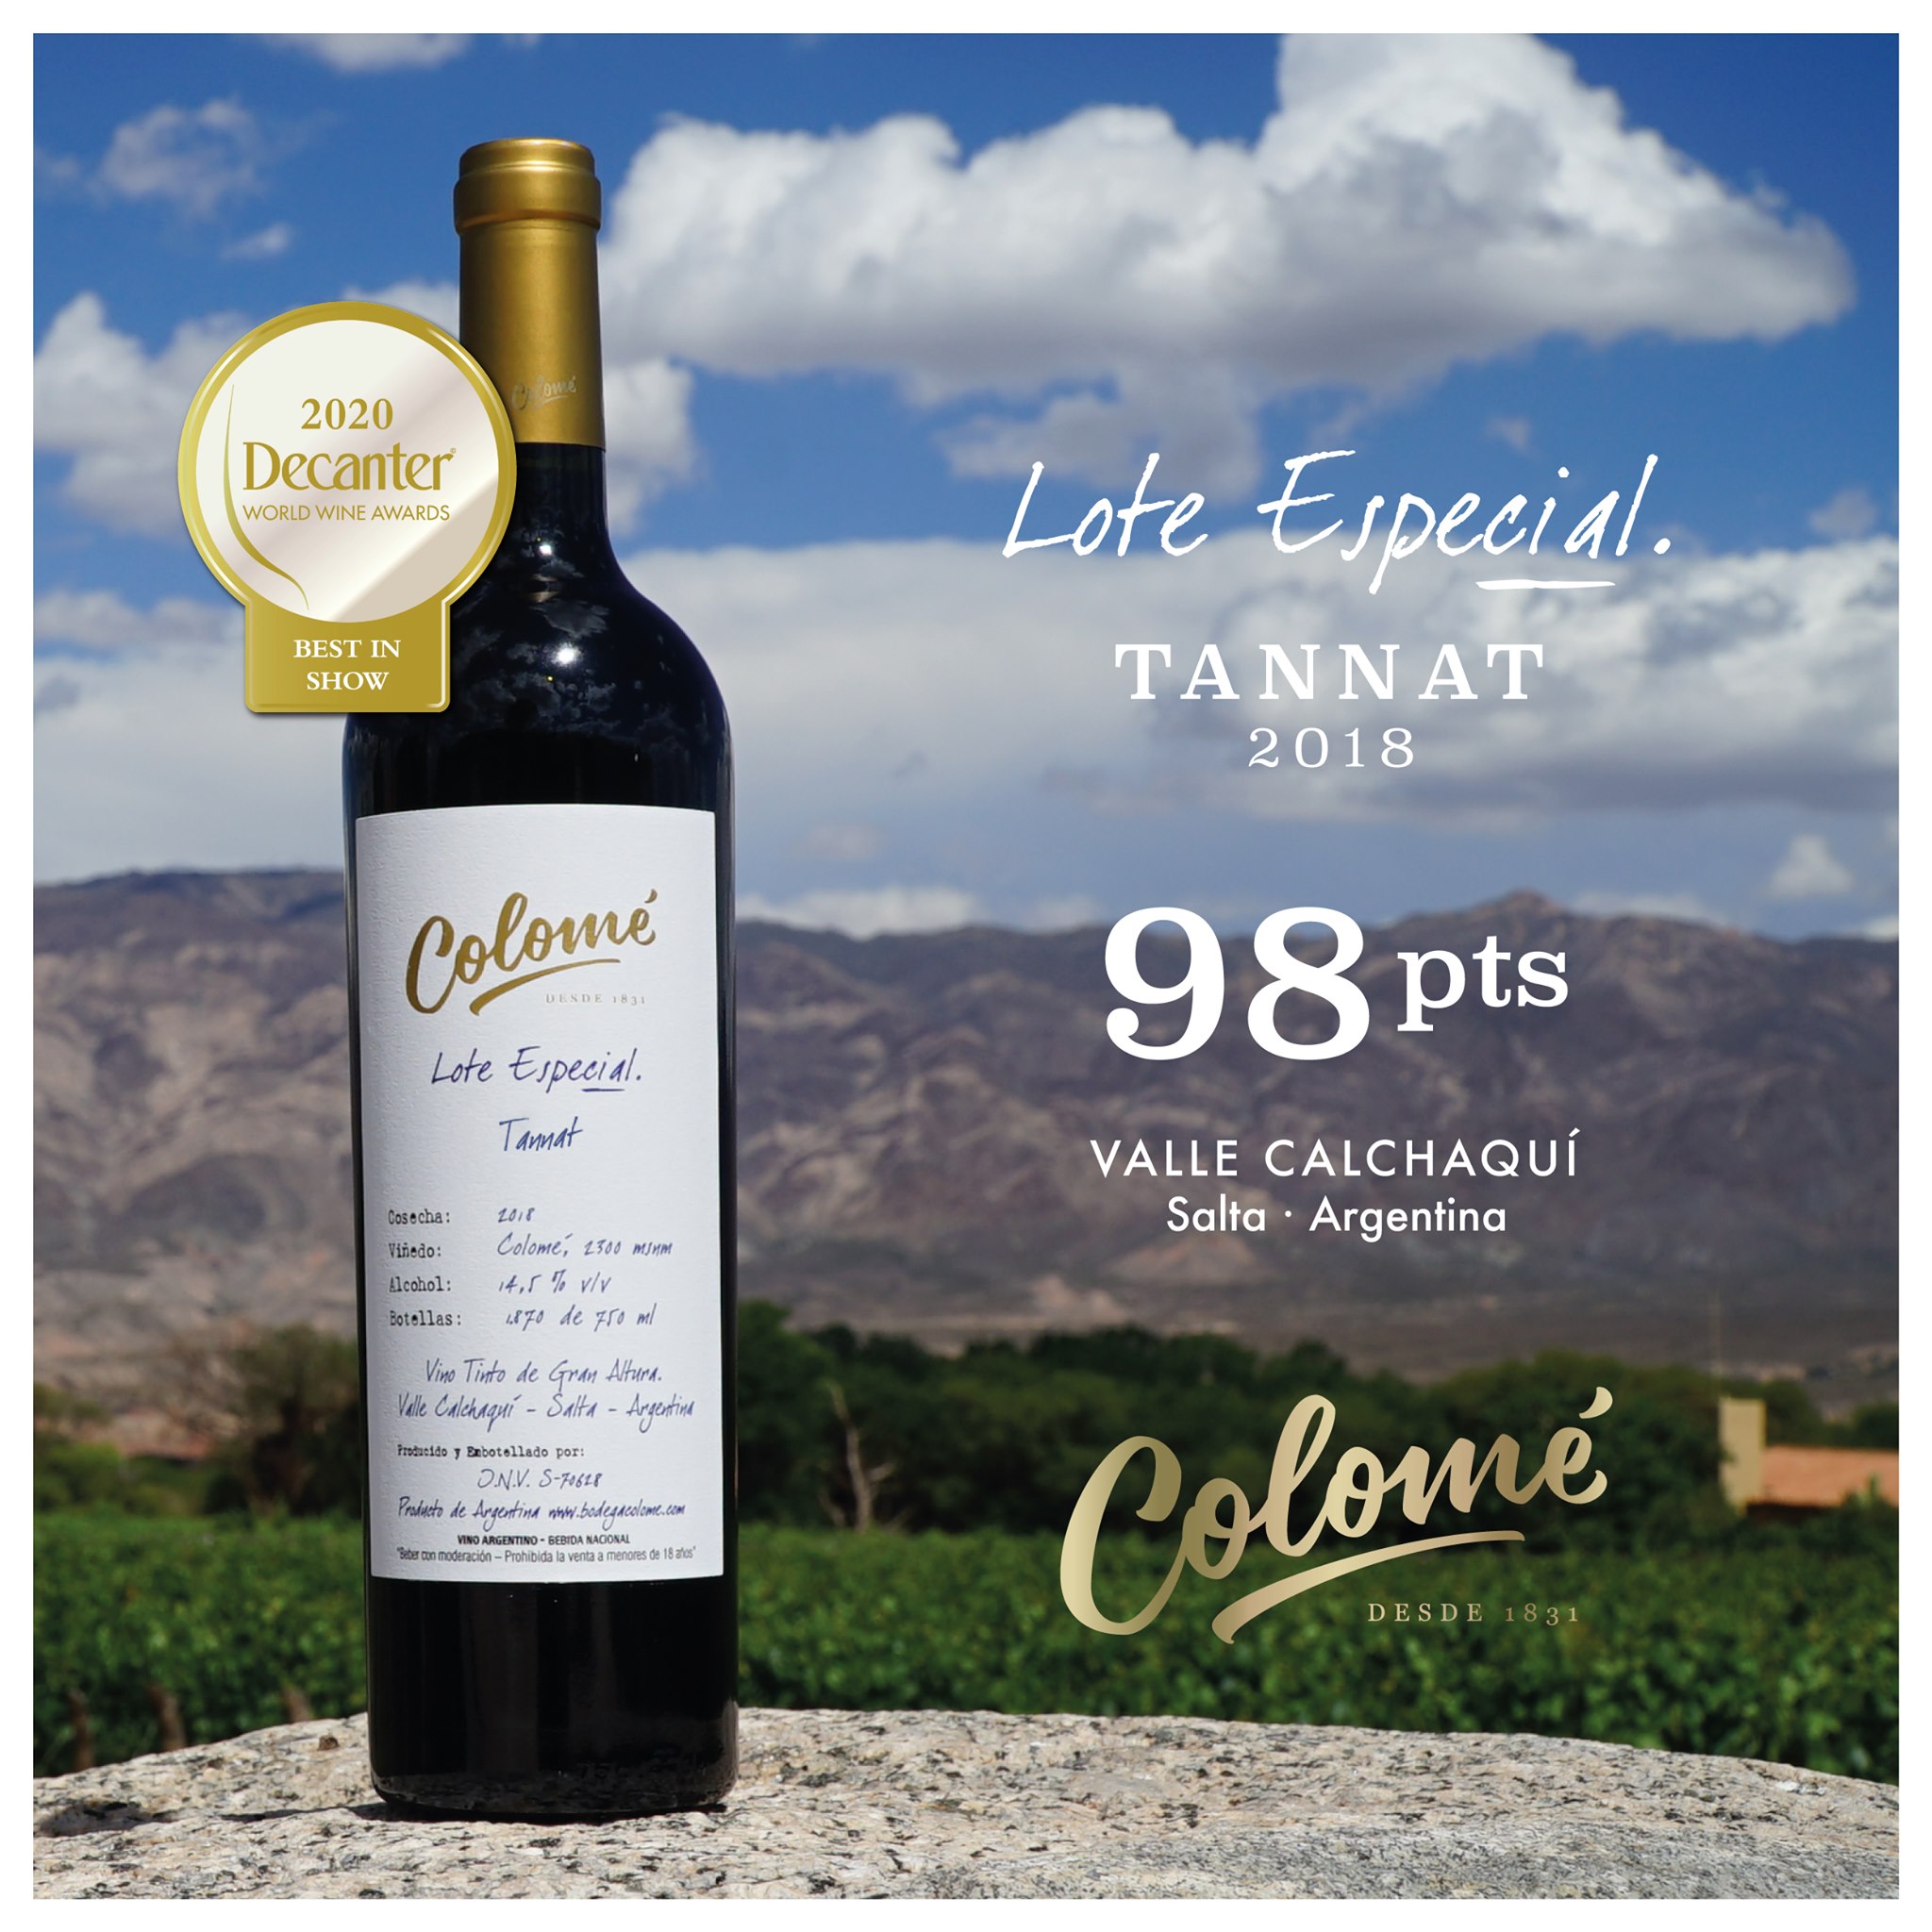 Lote Especial Tannat 2018 "Best in Show"